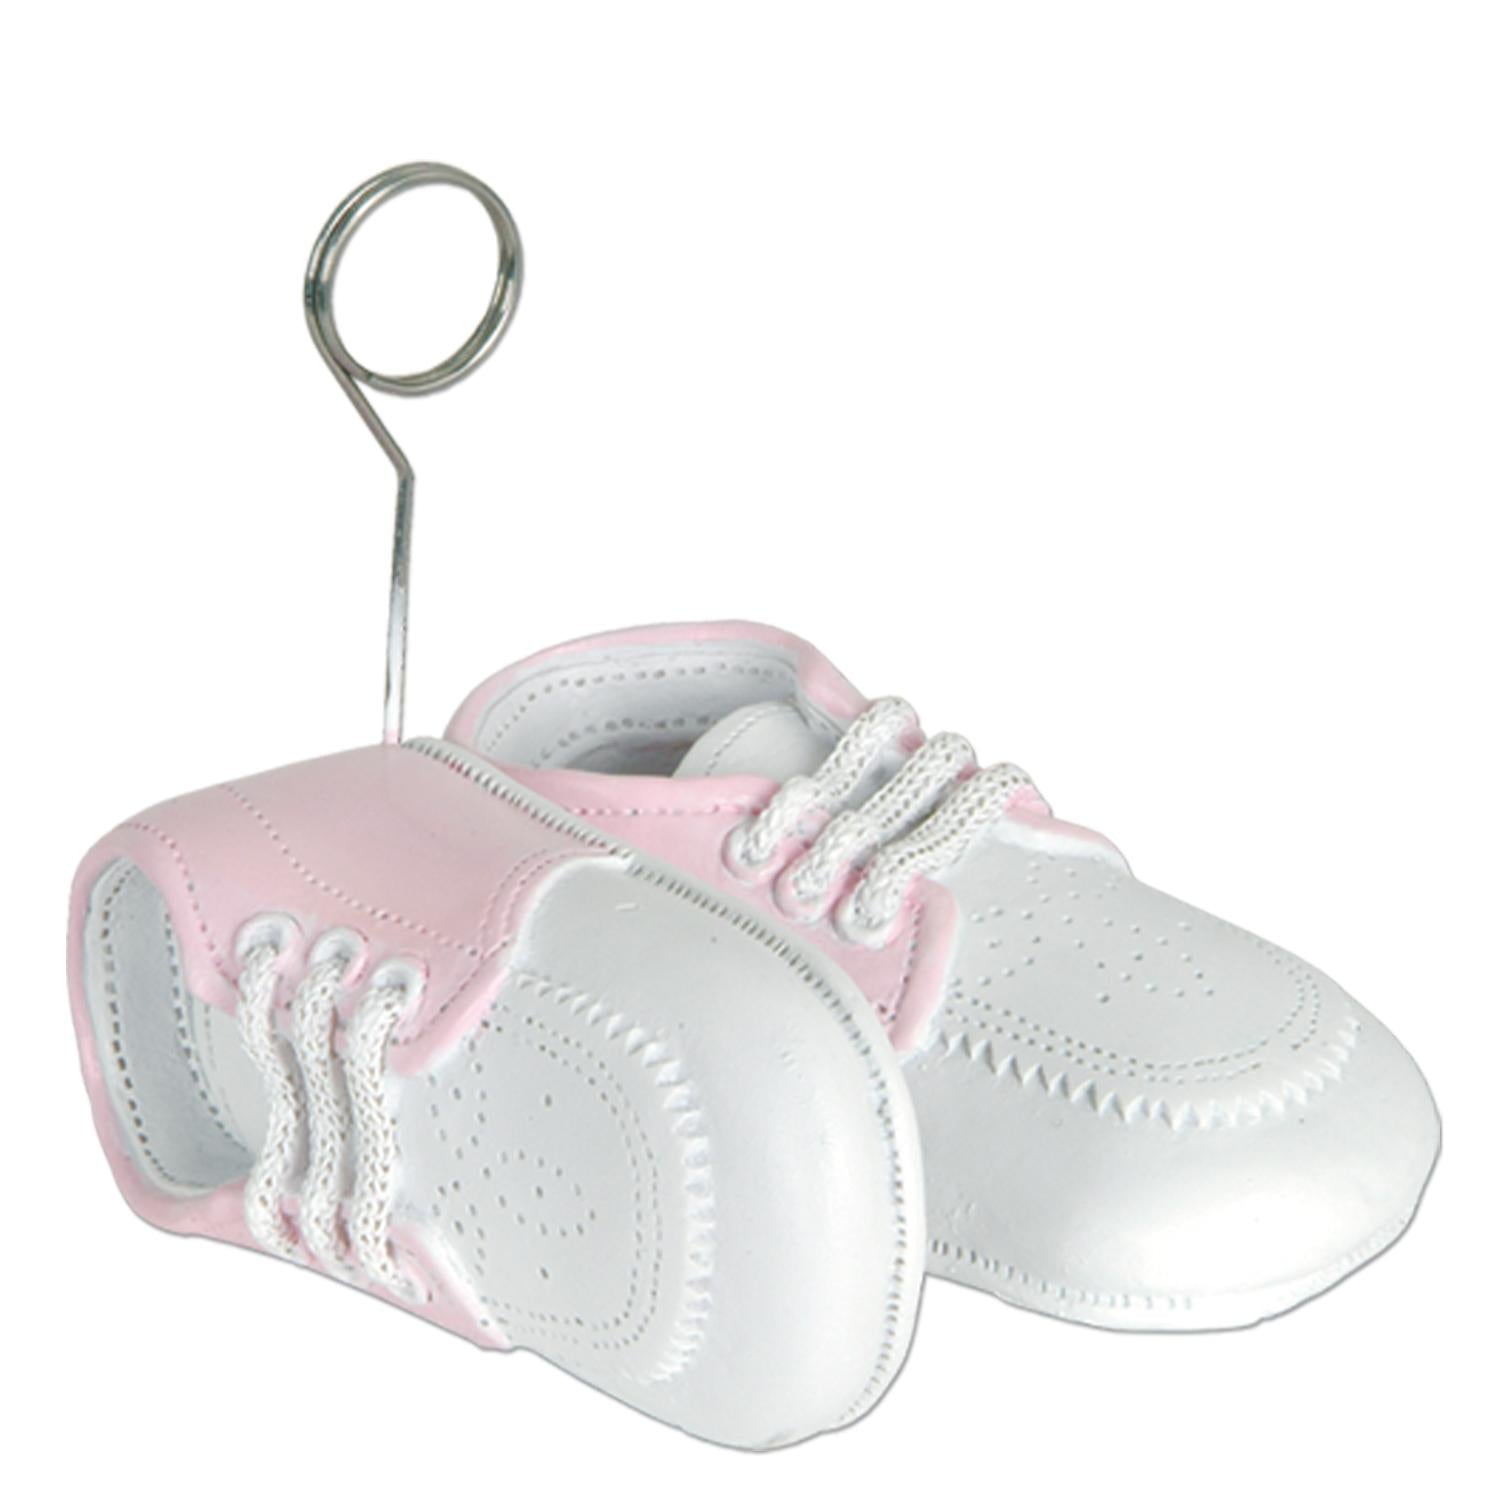 Beistle Baby Shoes Photo/Balloon Holder - white with pink upper